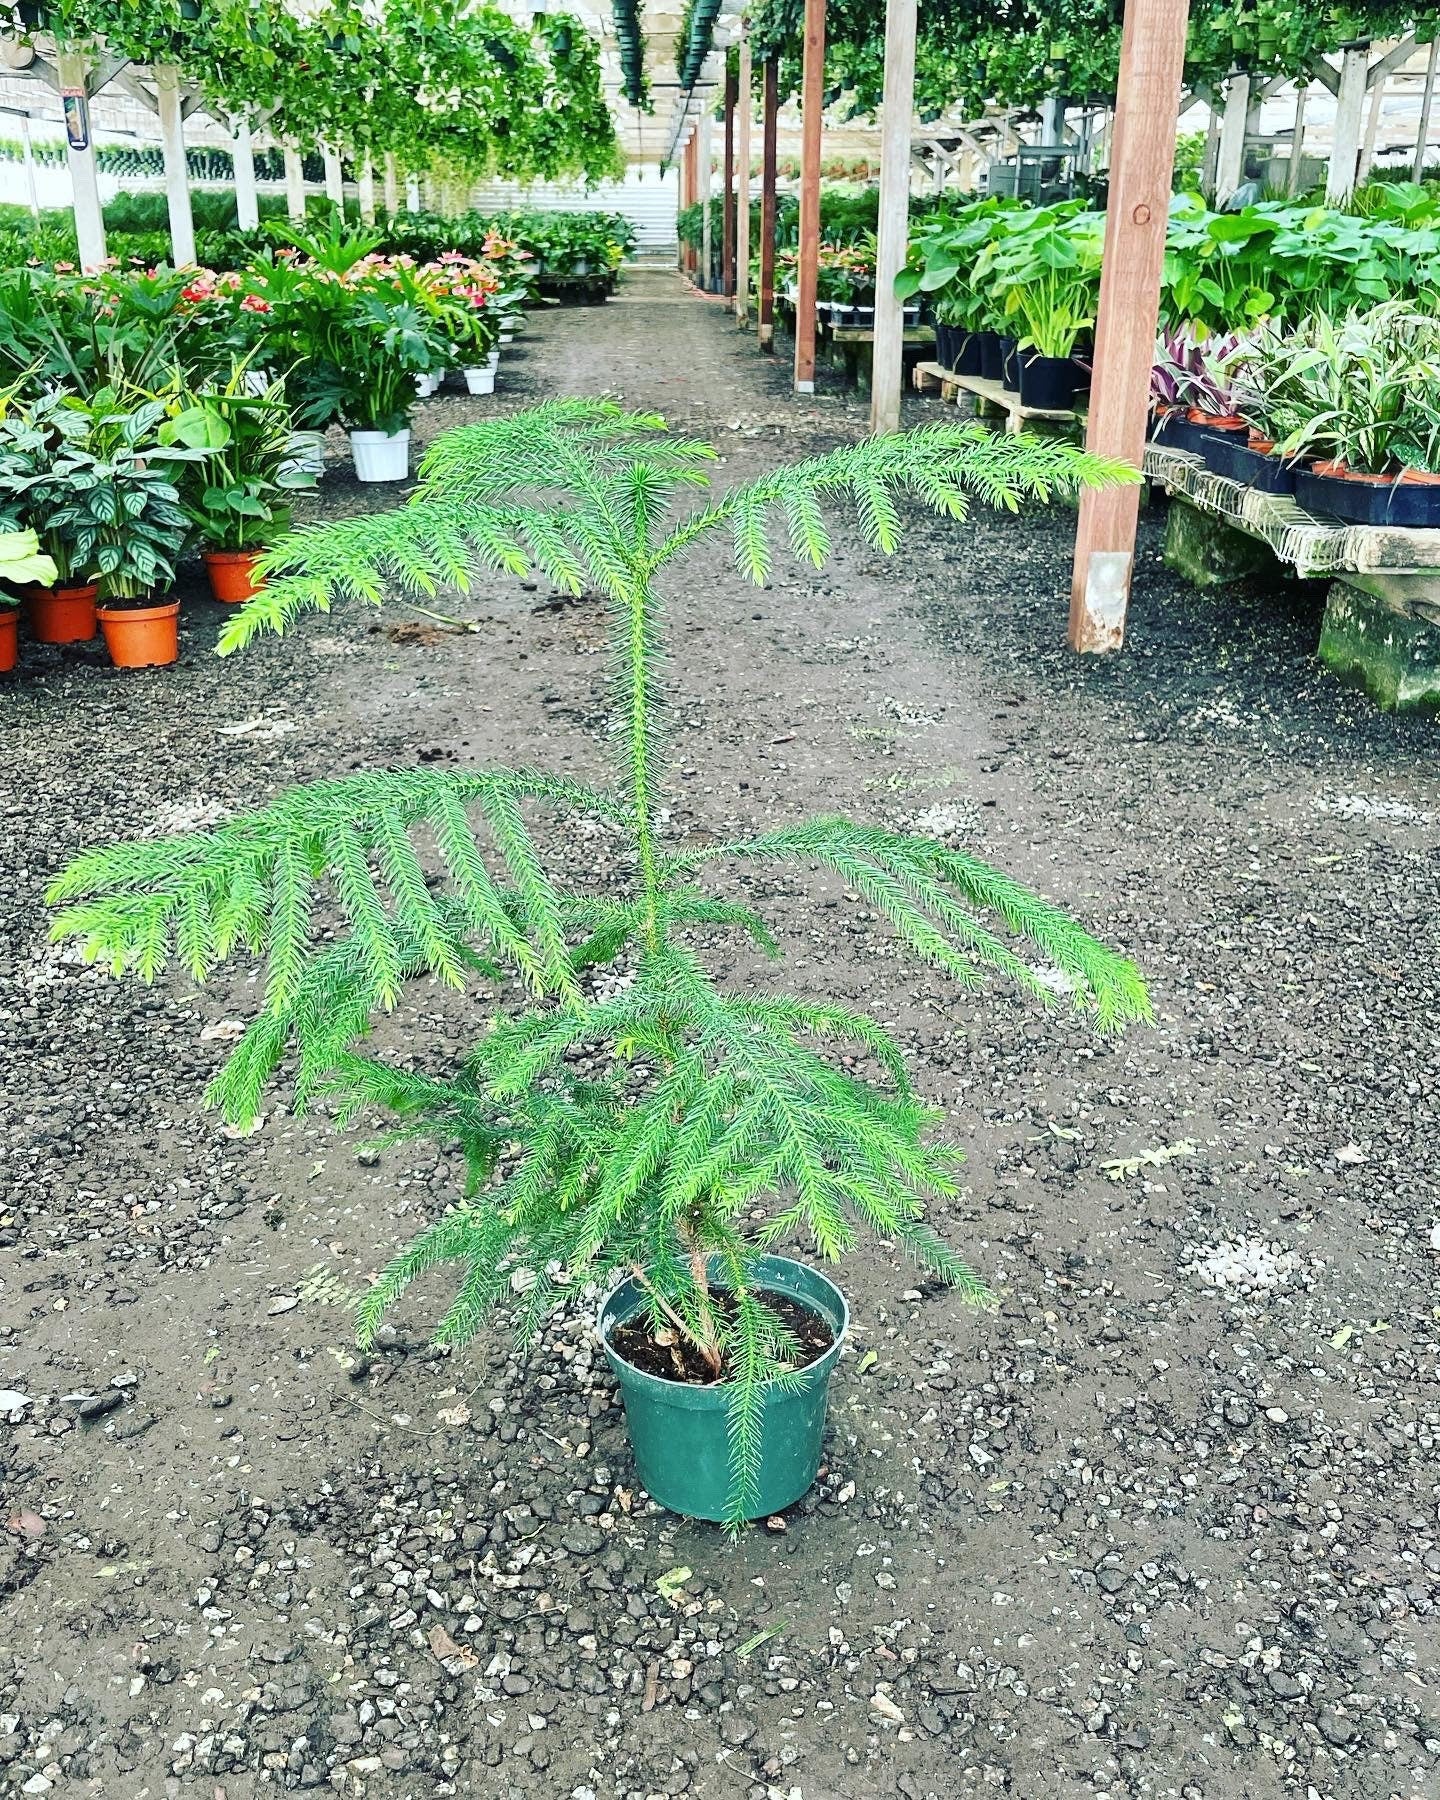 1 ft tall in 6 inches pot live plant -great Christmas tree indoors or outdoors -Norfolk pine